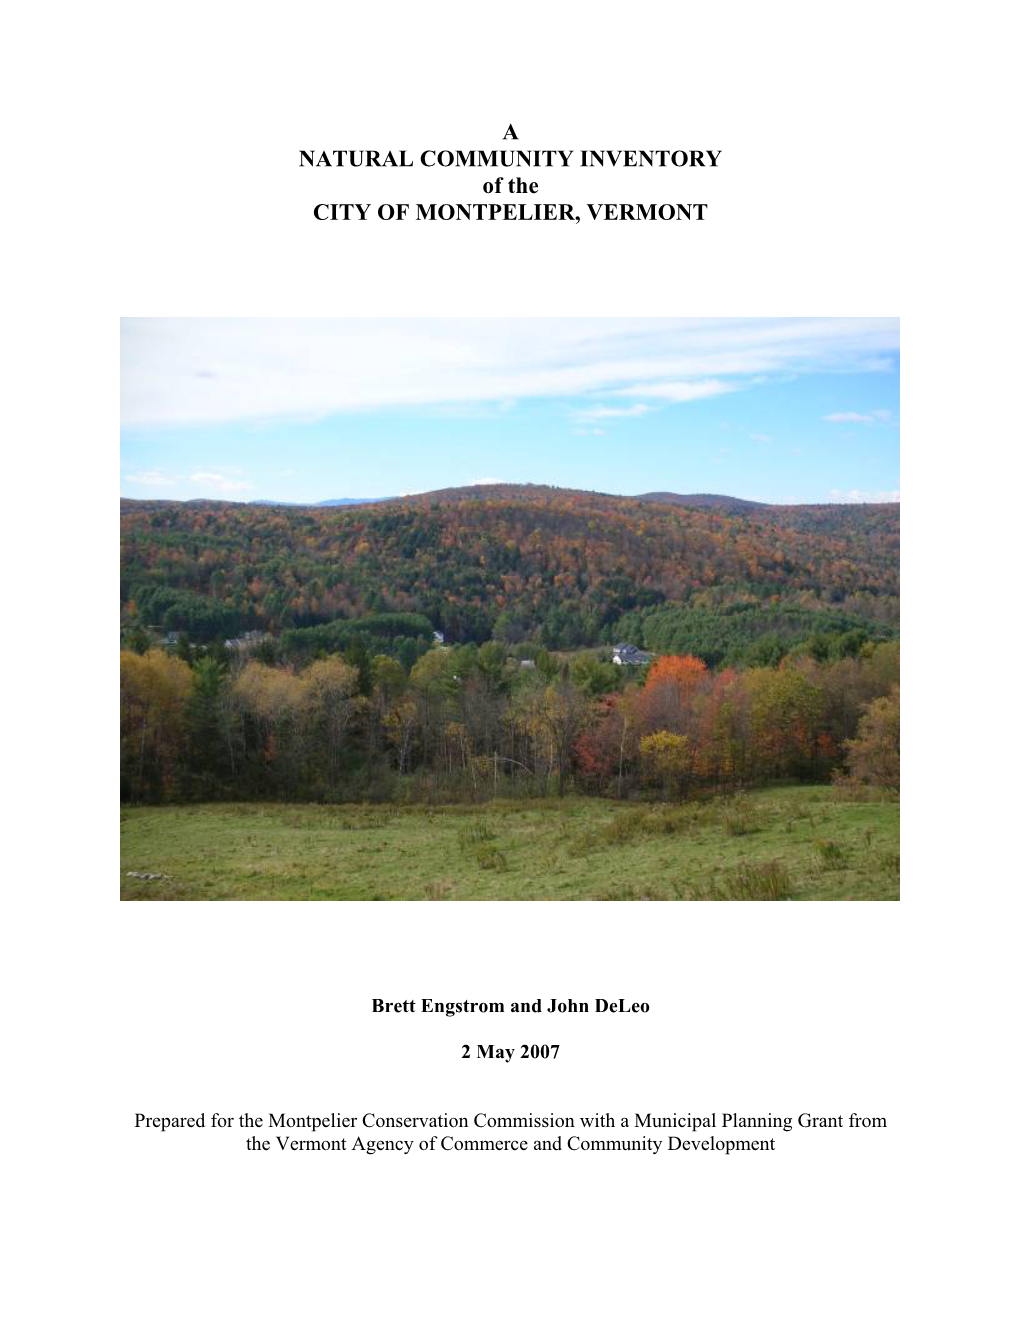 A NATURAL COMMUNITY INVENTORY of the CITY of MONTPELIER, VERMONT